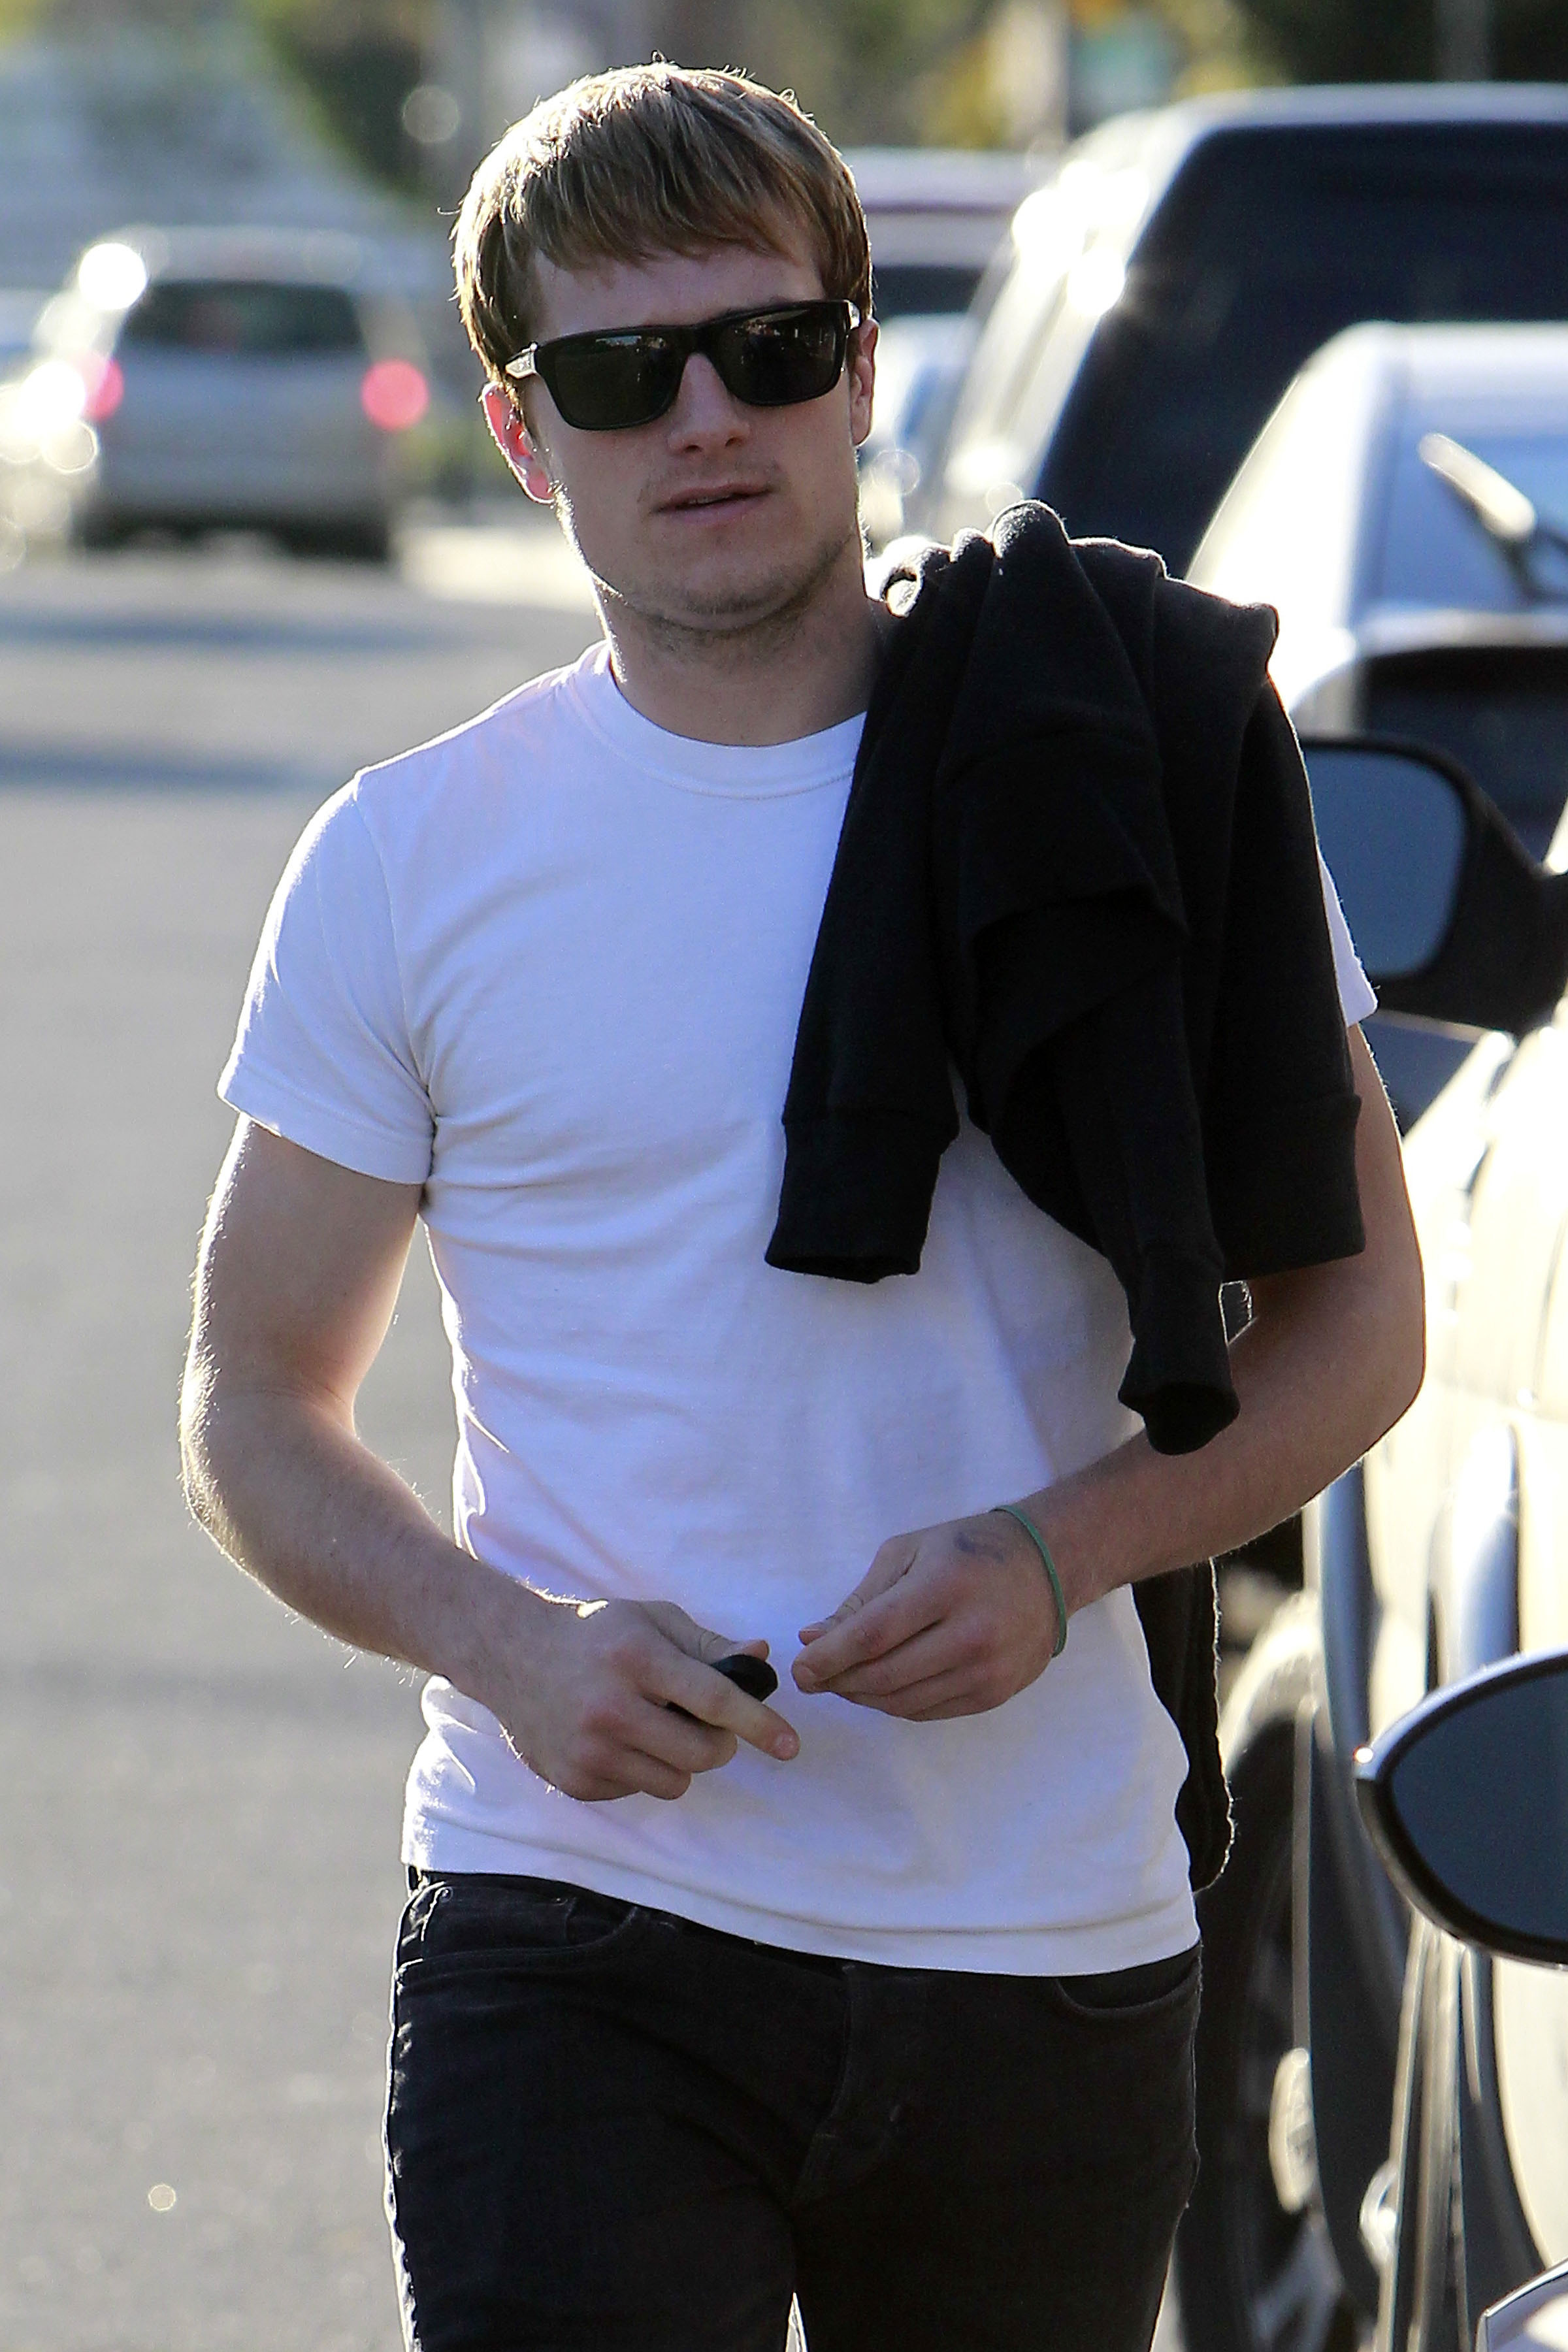 Photo of Josh spotted in California with blonde hair (2.20.2013) [HQ] for f...